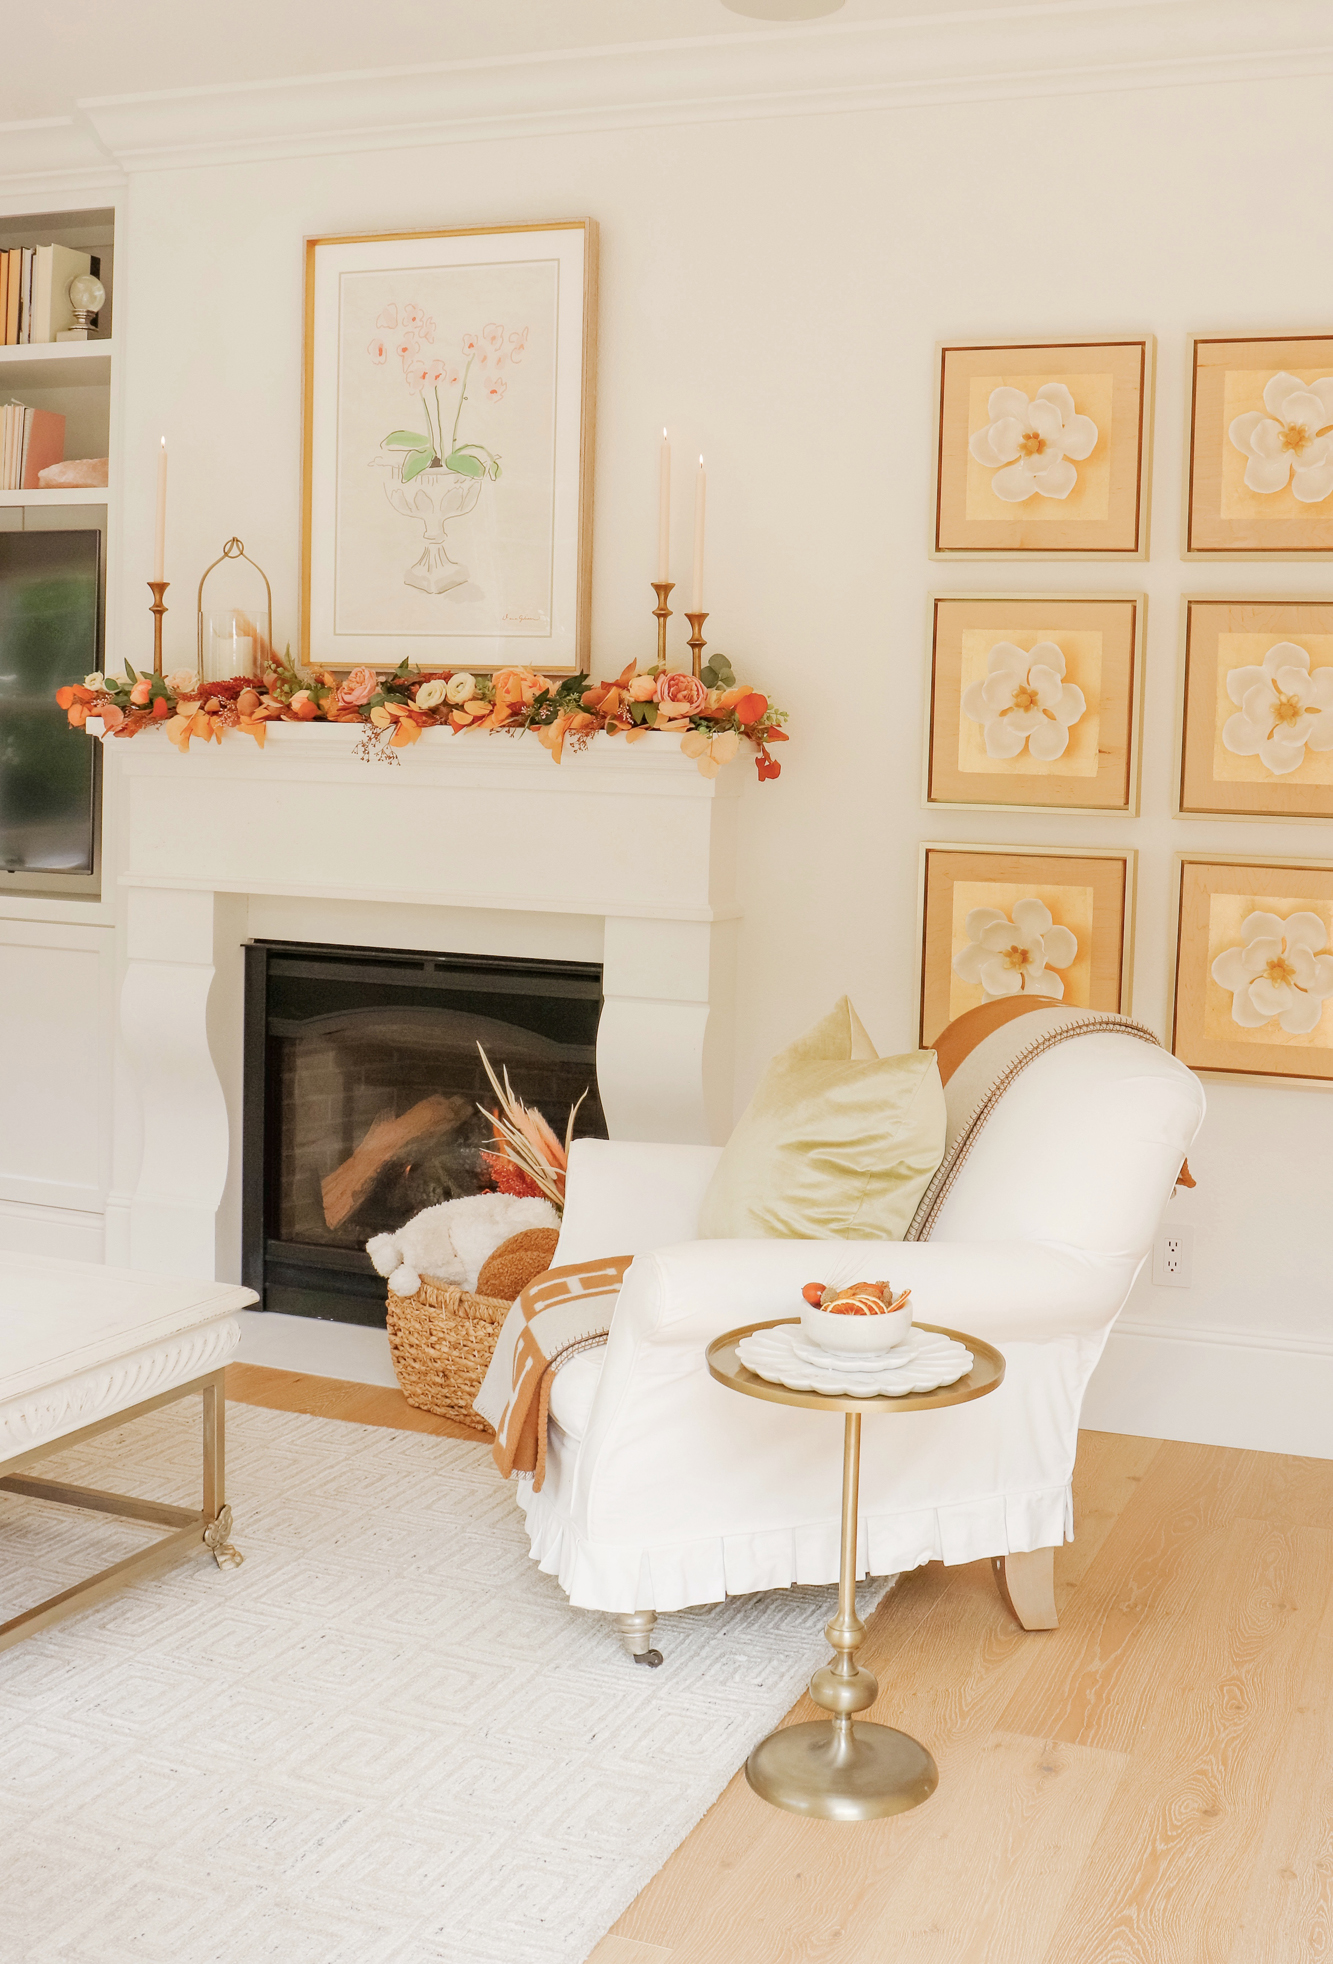 Easy Fall Mantel Decor Ideas - Simple and Affordable Autumn Mantel Look that takes minimal effort. Looks beautiful and is so fun for the cozy season. 